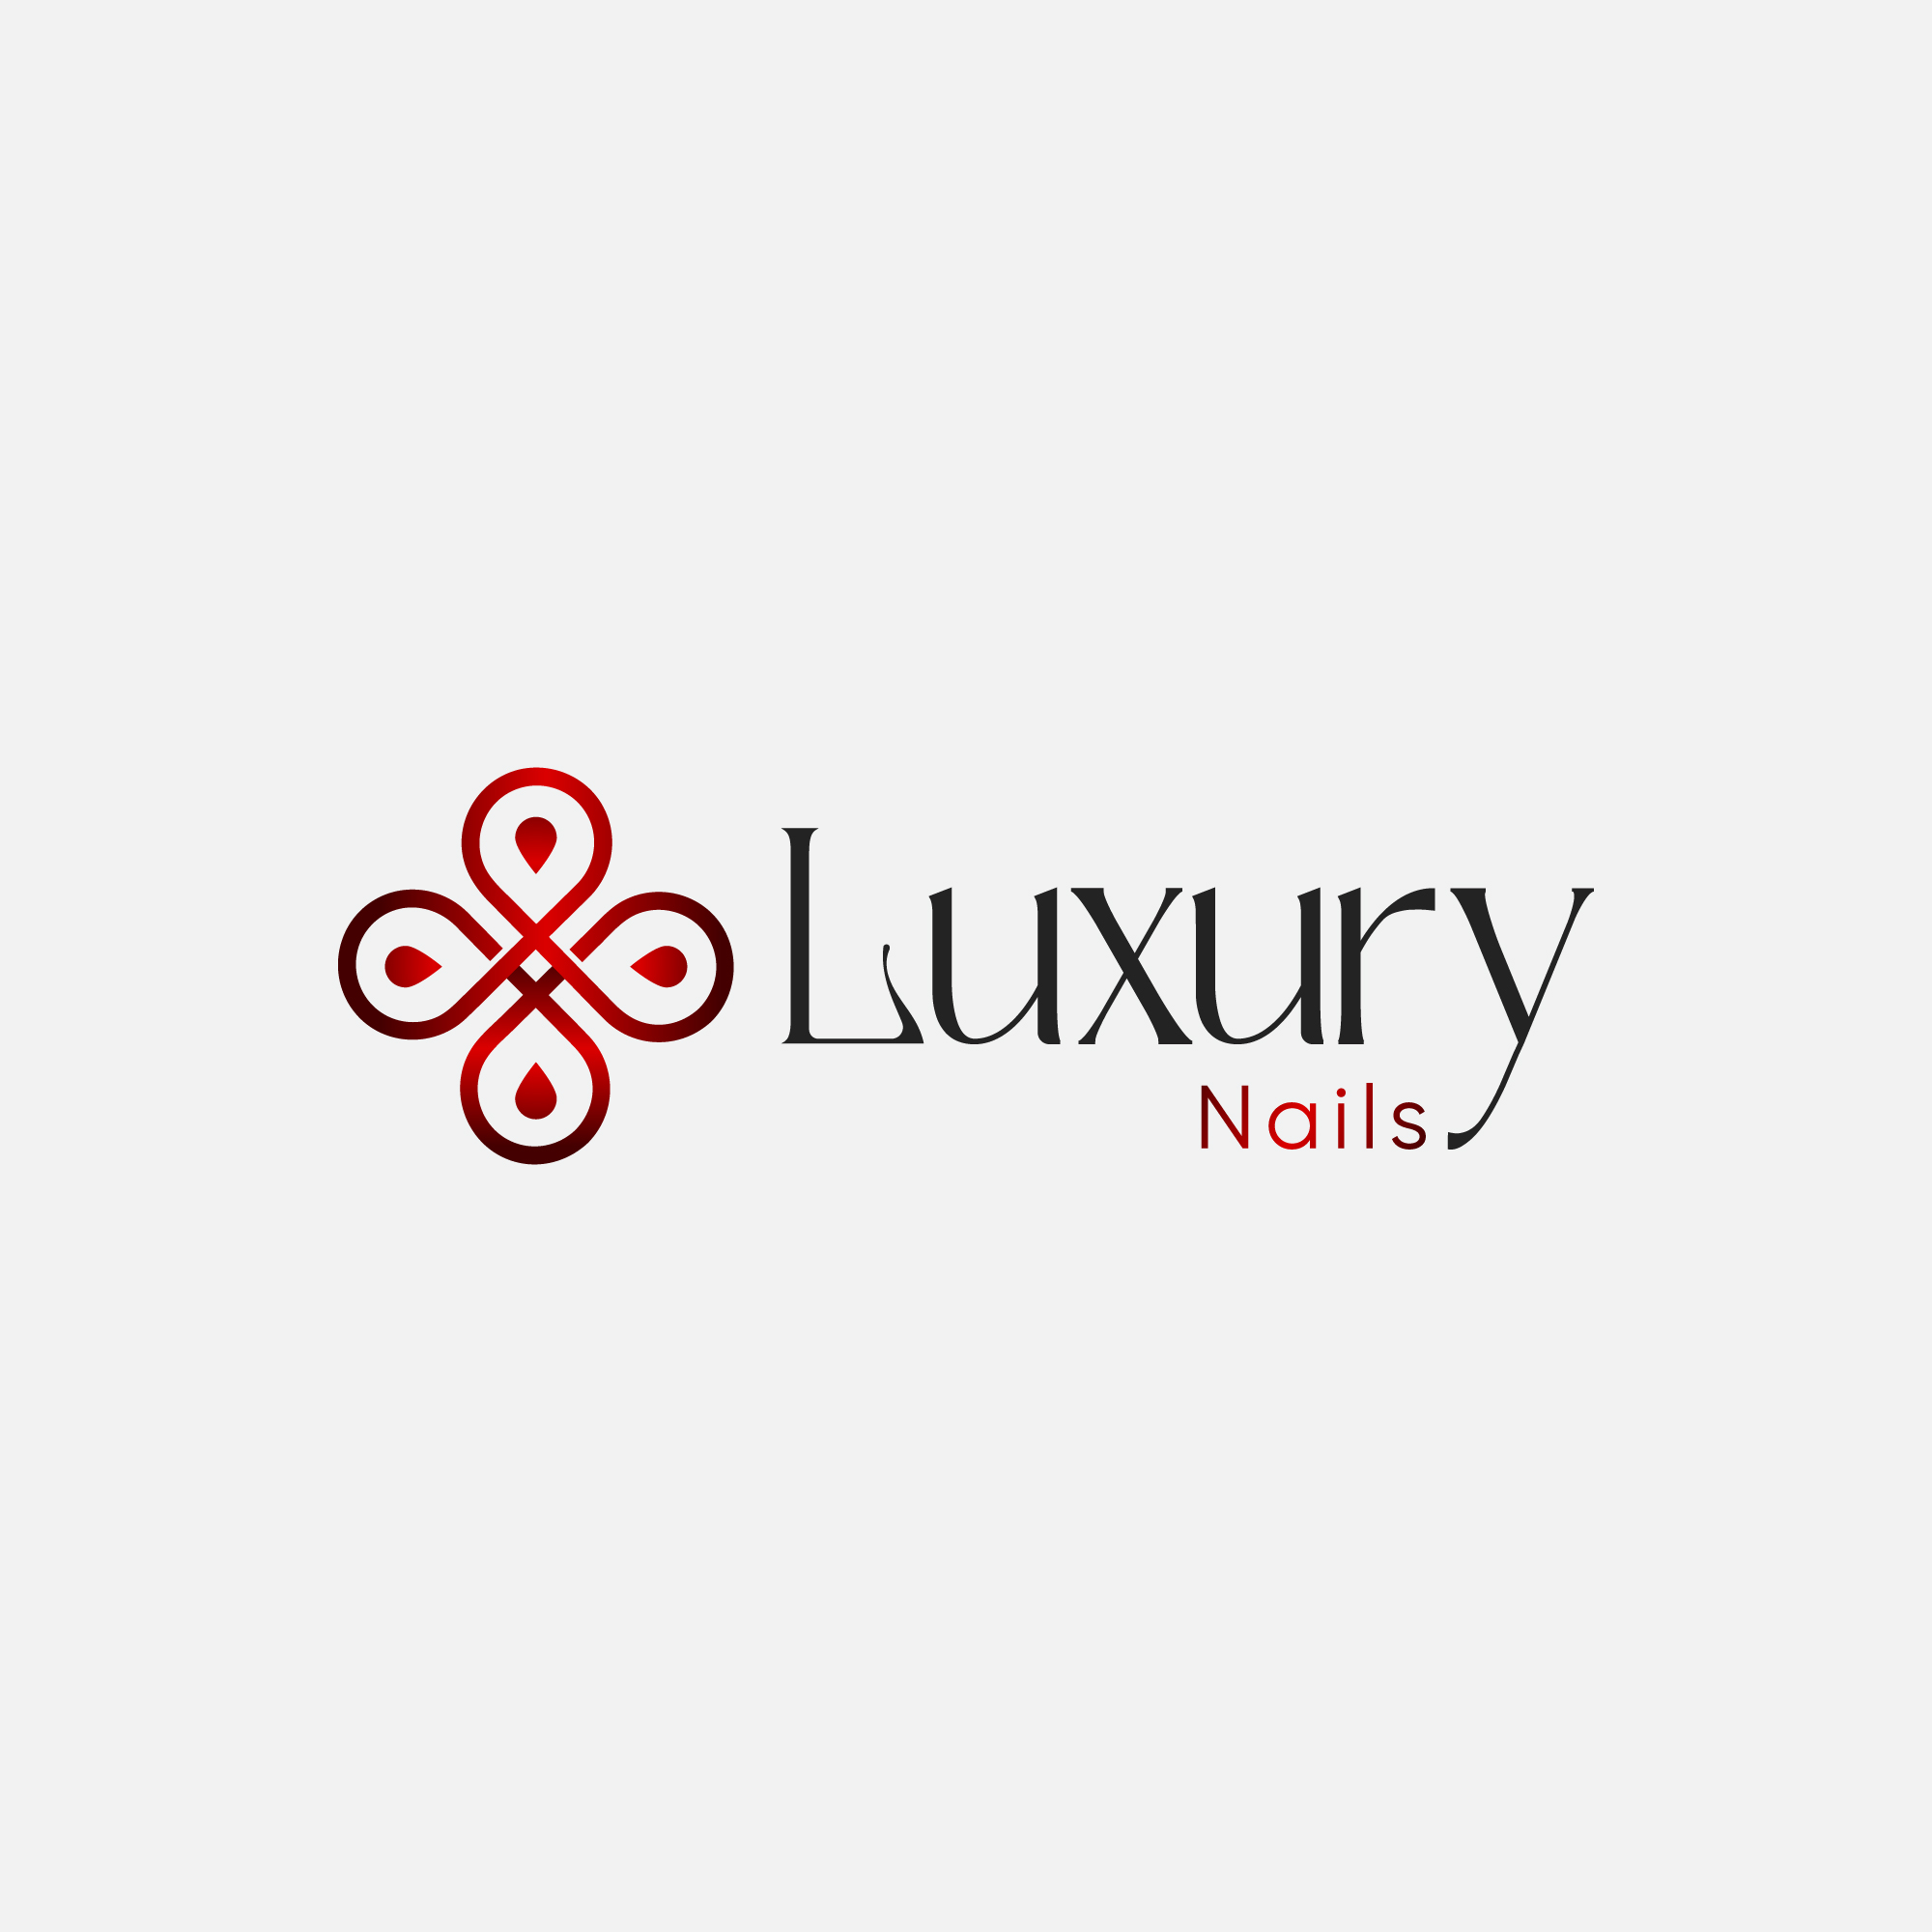 Luxury Nails About 02 